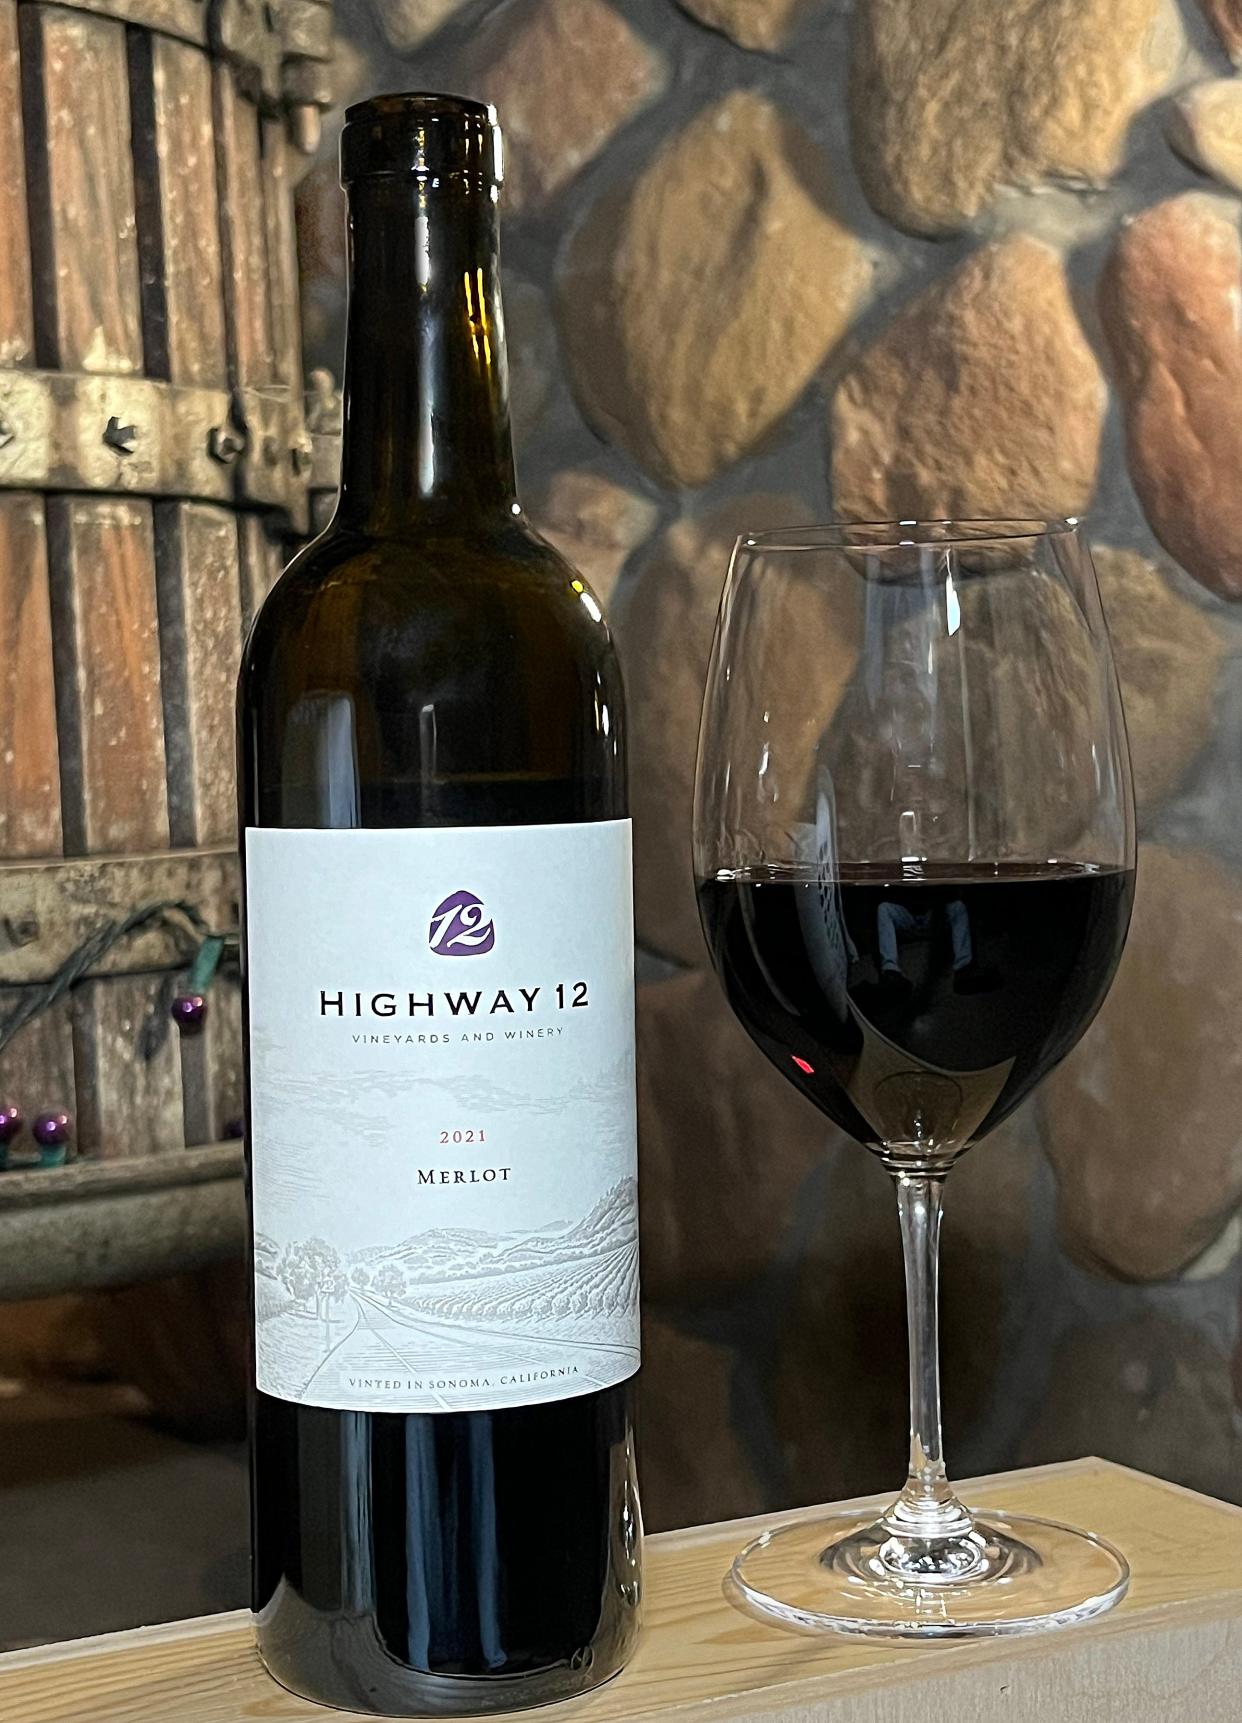 Highway 12 Sonoma County merlot over-delivers for its price at $19.99 a bottle.